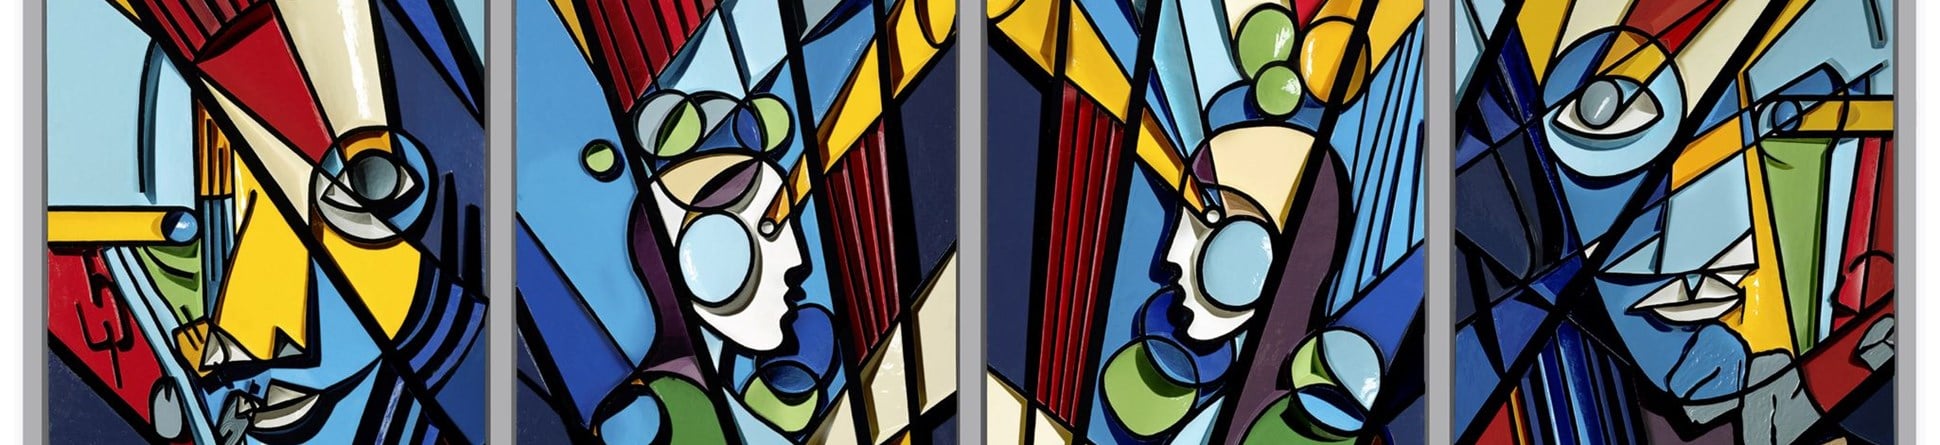 A stained glass artwork comprising four panels depicting the faces of enslaved people.